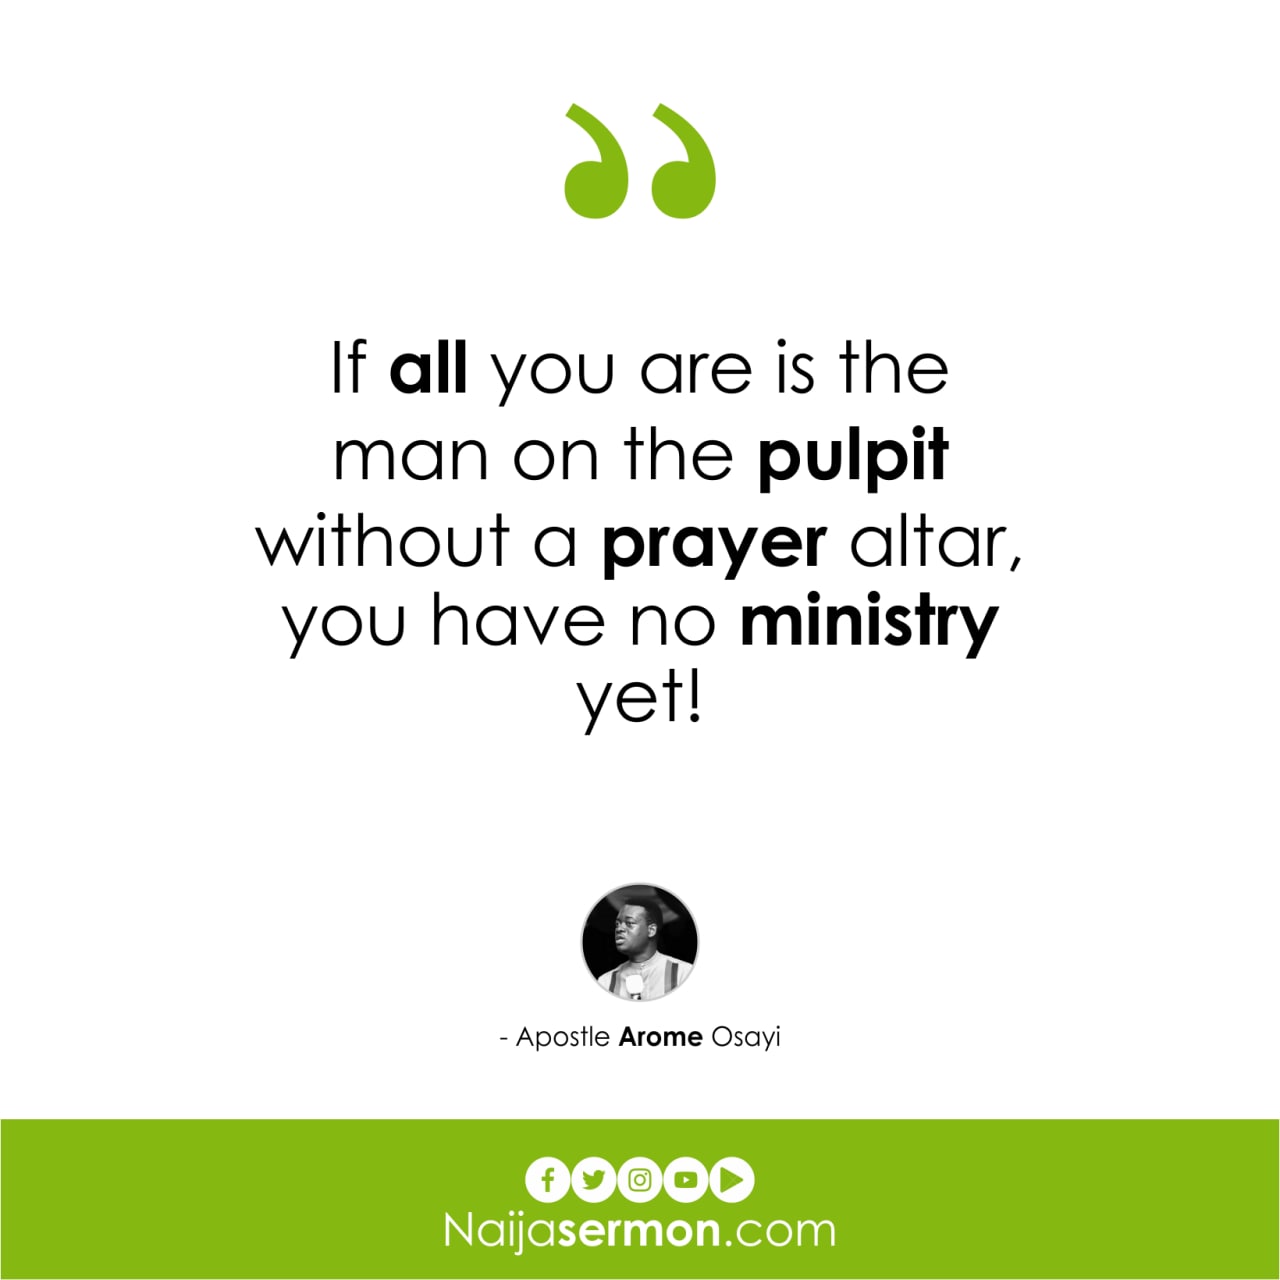 QUOTE OF THE DAY BY APOSTLE AROME OSAYI 1